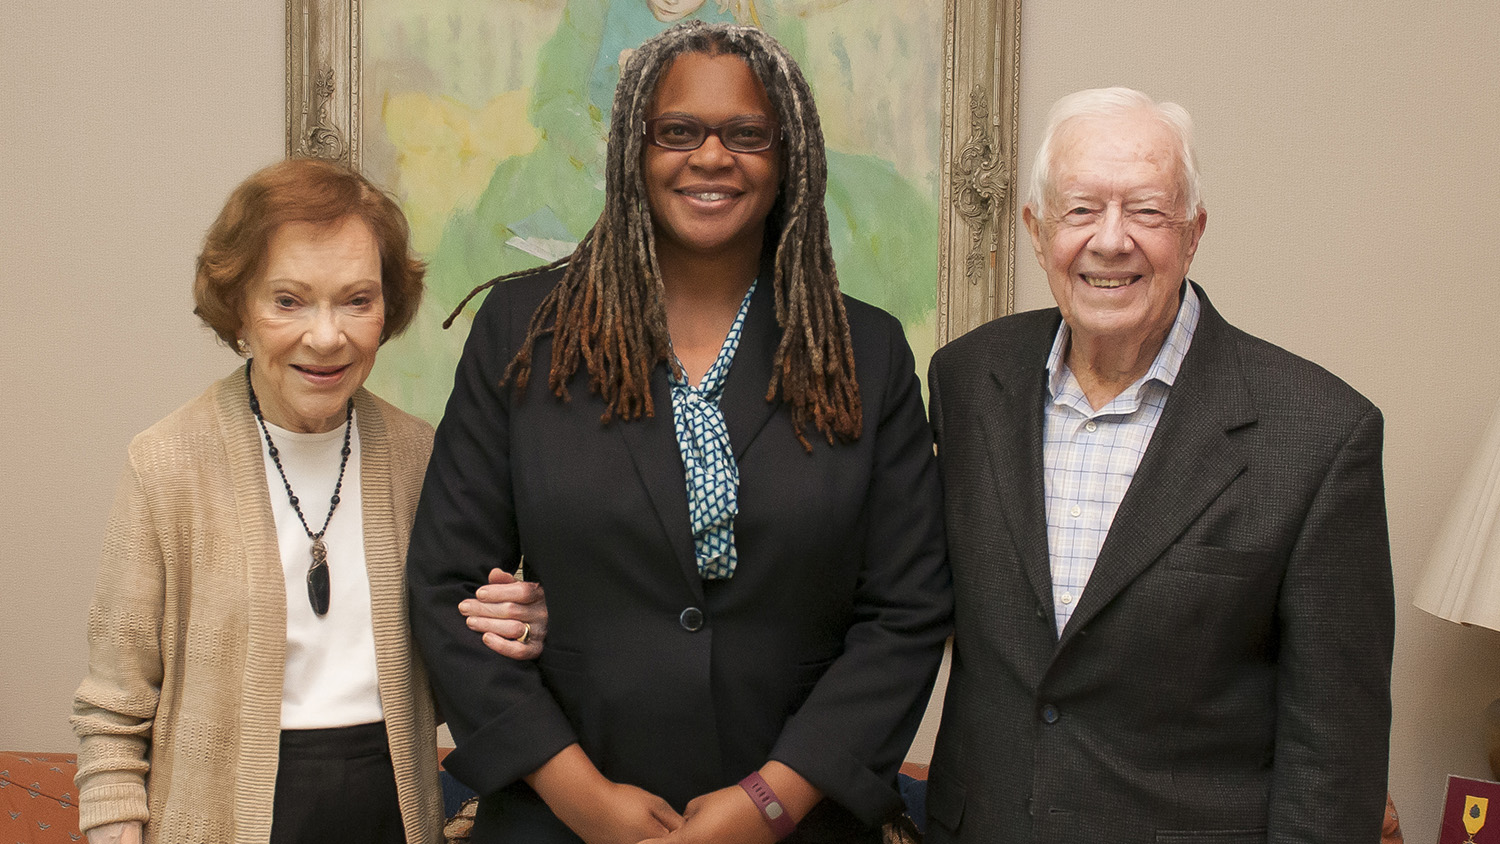 Meredith Evans standing with Jimmy Carter and wife, Rosalynn